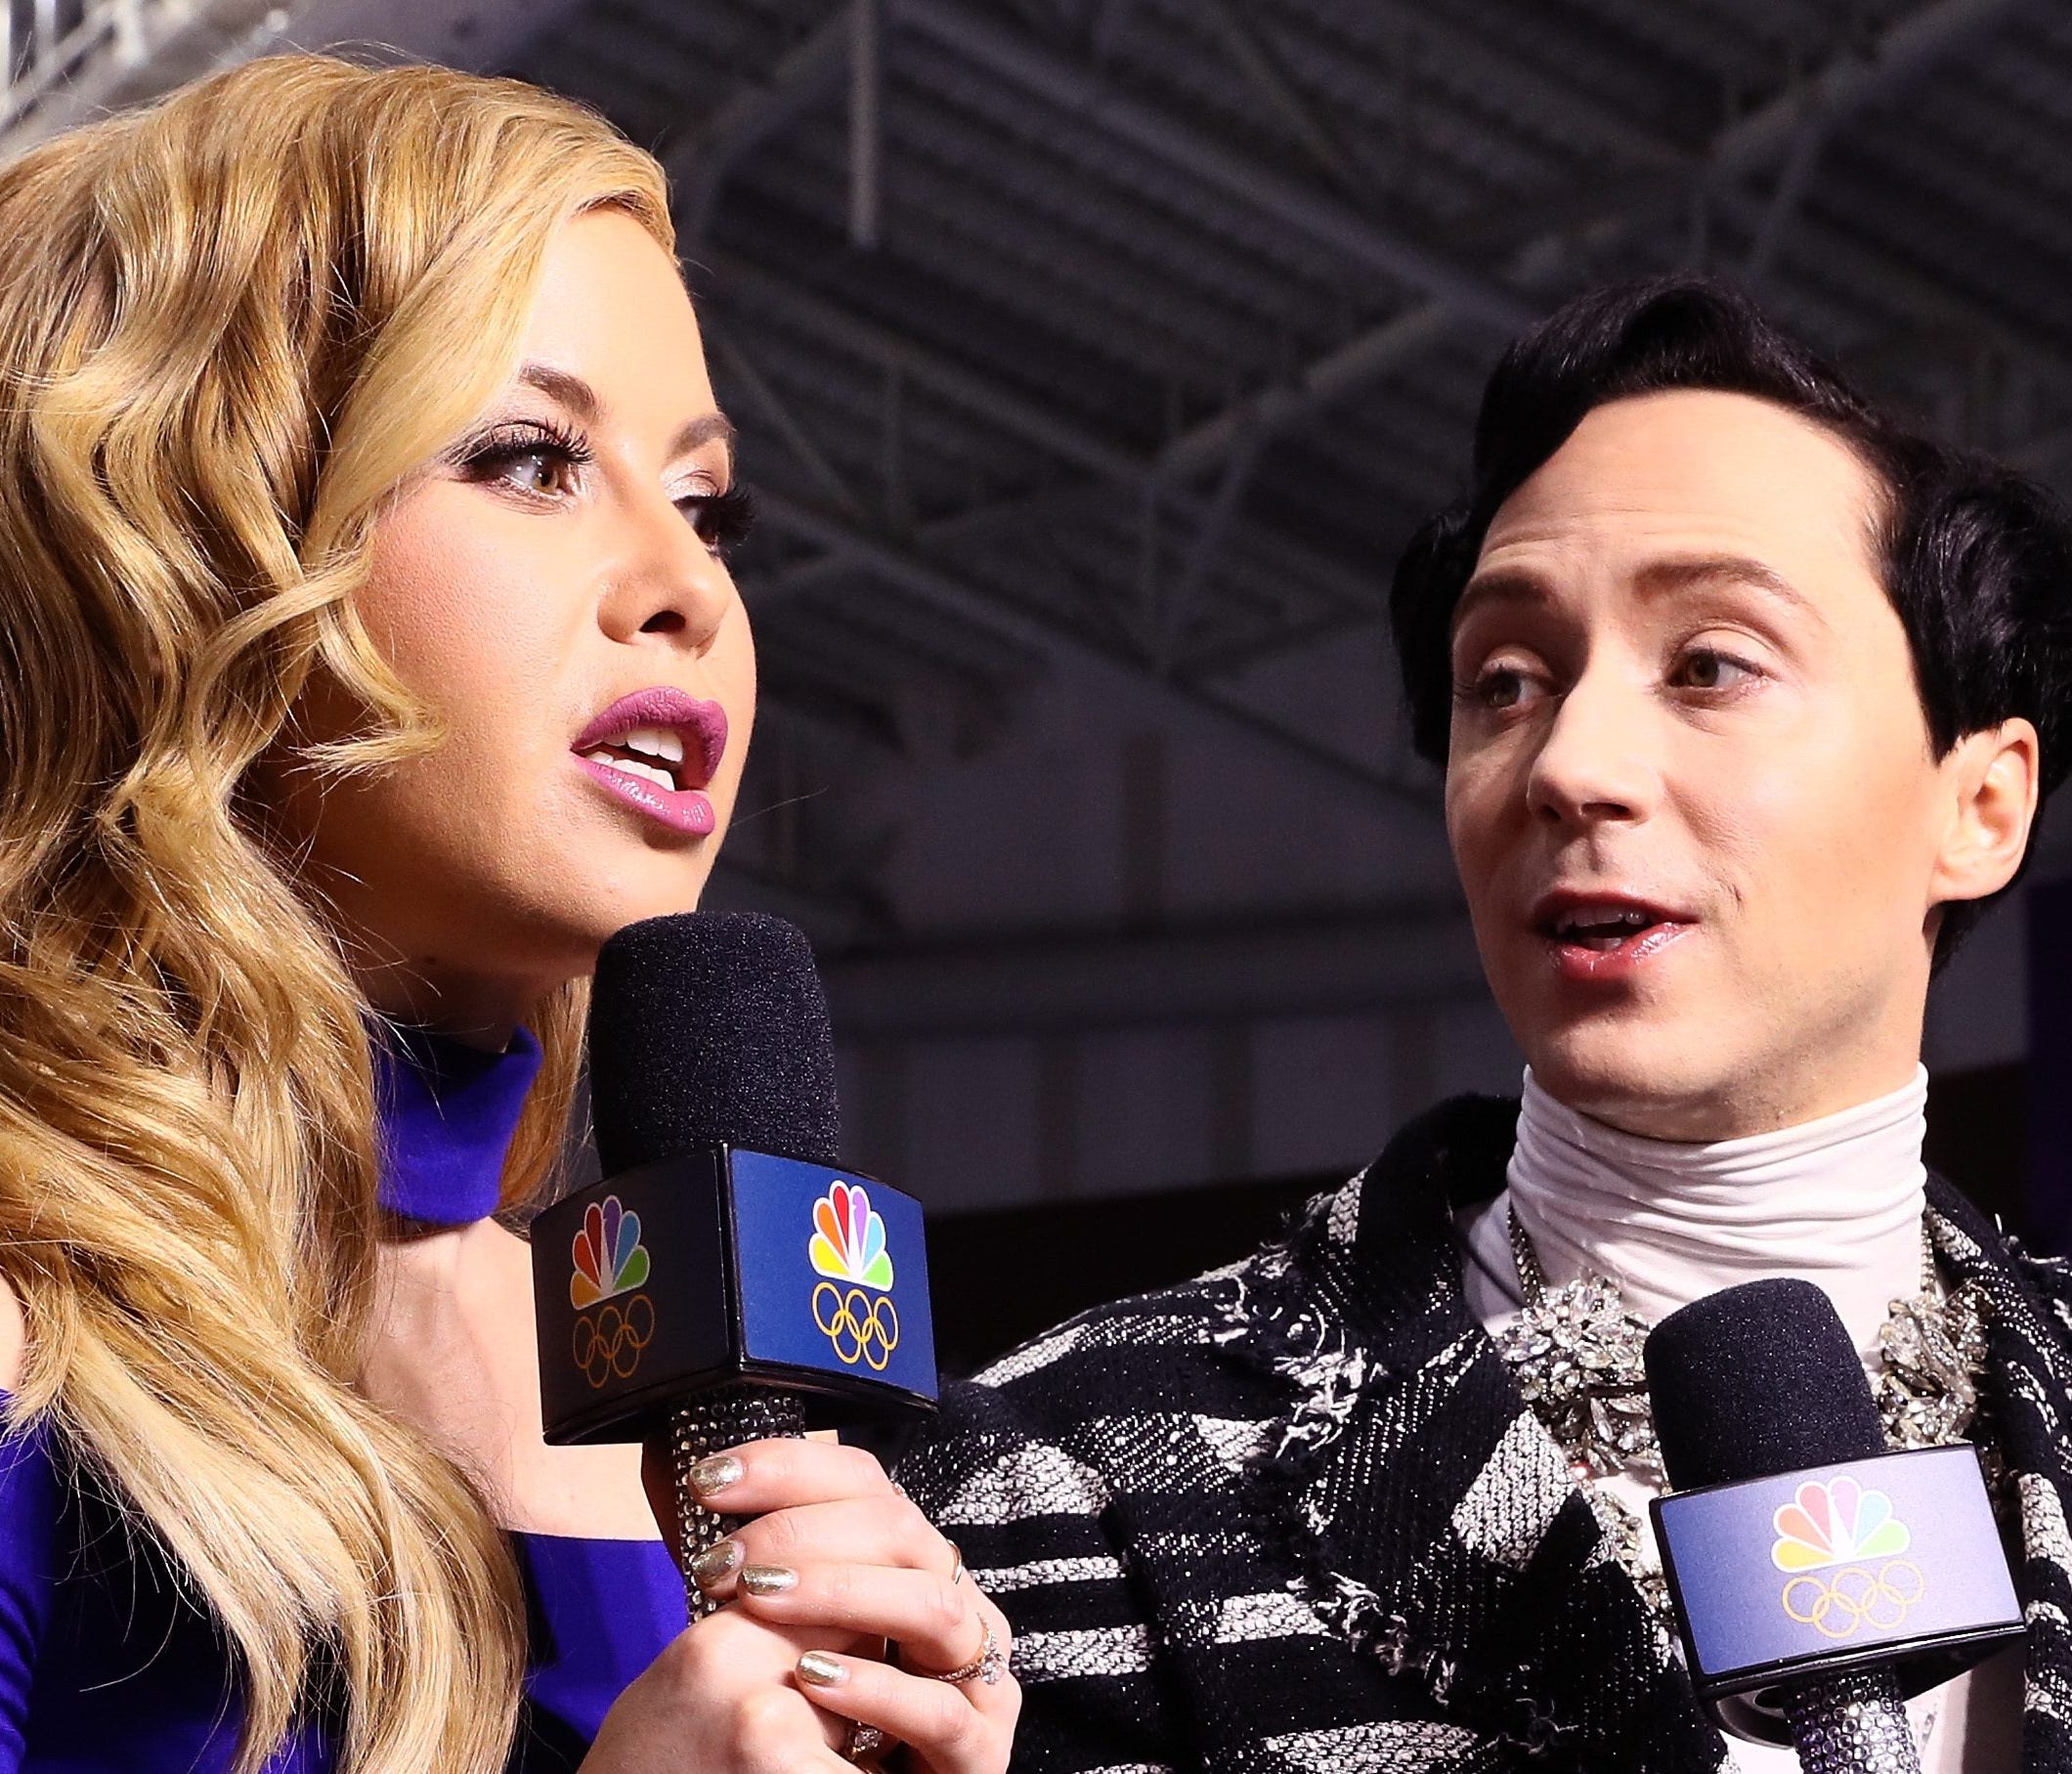 GANGNEUNG, SOUTH KOREA - FEBRUARY 14:  Figure skating announcers Tara Lipinski and Johnny Weir prepare for the start of the Pair Skating Short Program on day five of the PyeongChang 2018 Winter Olympics at Gangneung Ice Arena on February 14, 2018 in 